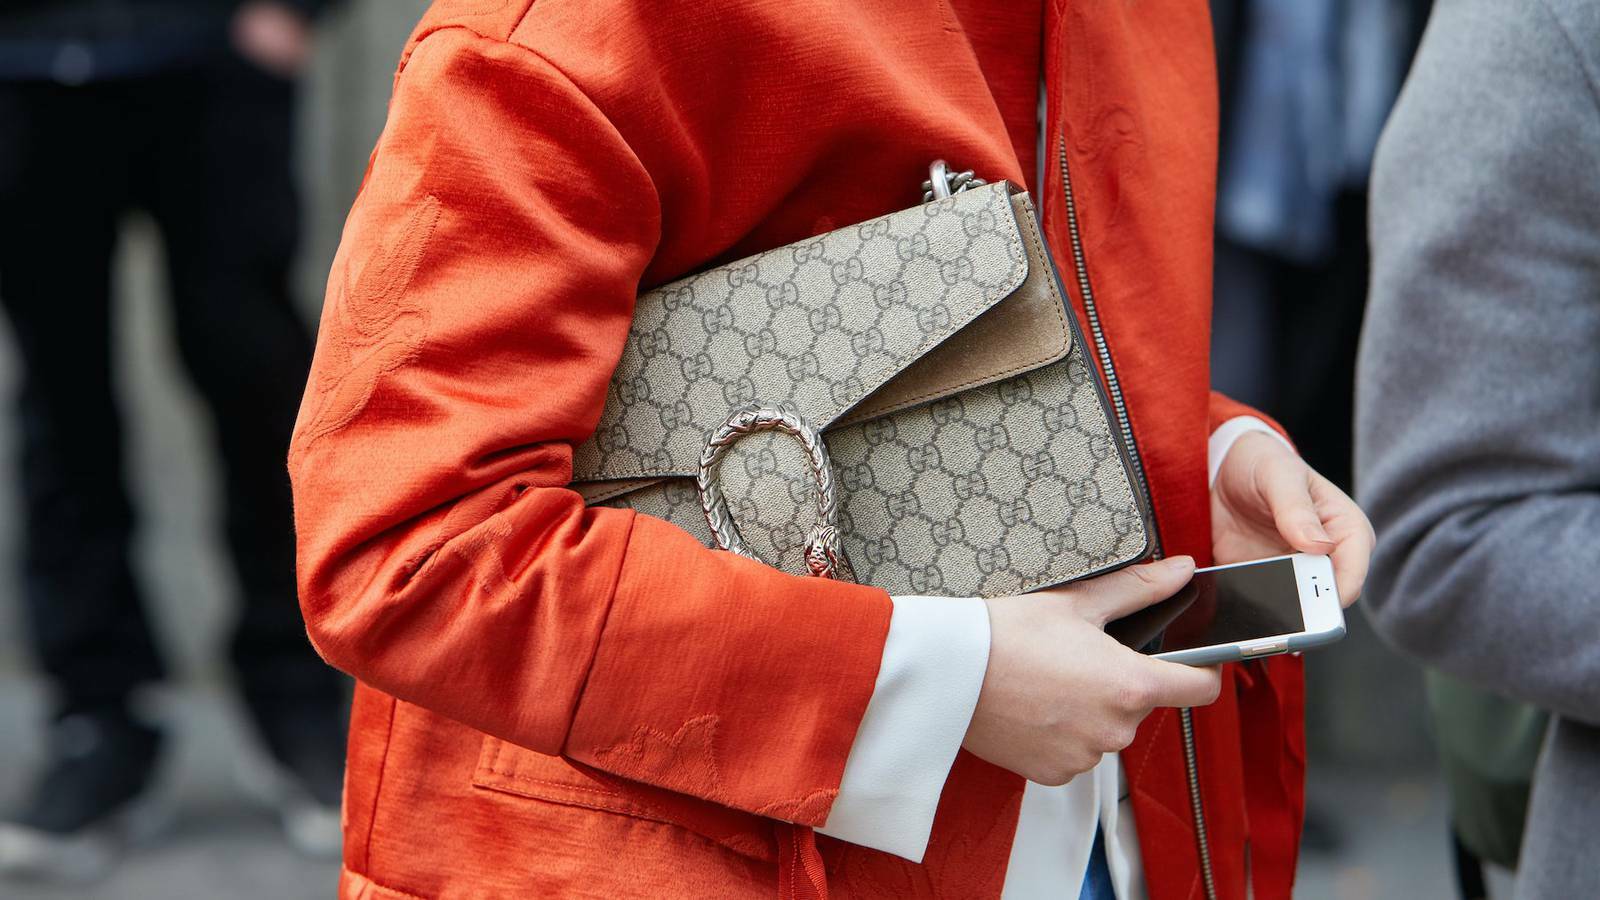 A person wearing an orange jacket, wearing a Gucci purse with the brand's logo all across it, and holding an iPhone in hand.